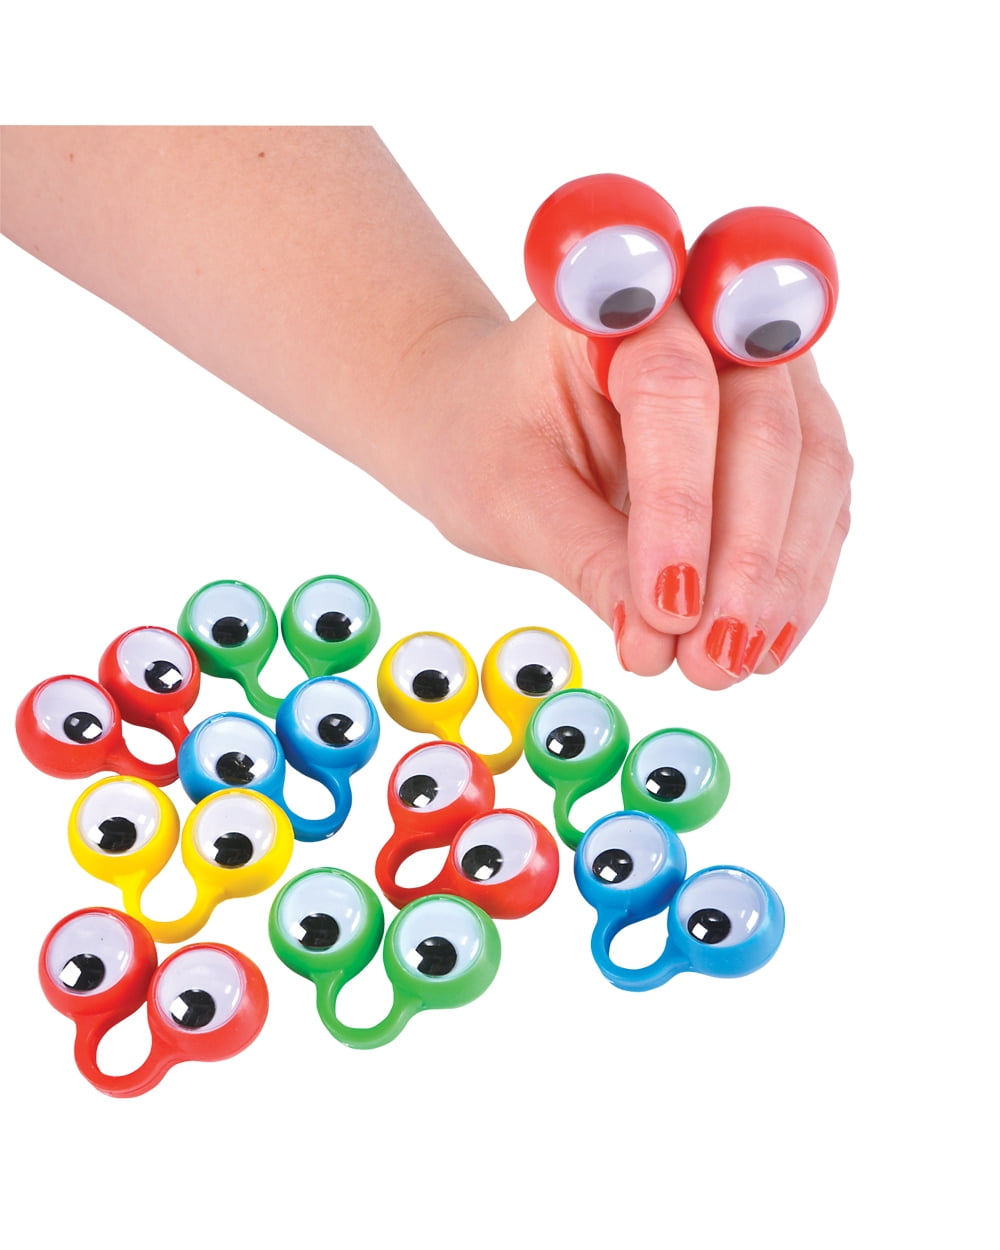 8 Googly Eyes Finger Puppets Party Favour Birthday Treat Loot Bag Toys Game Red